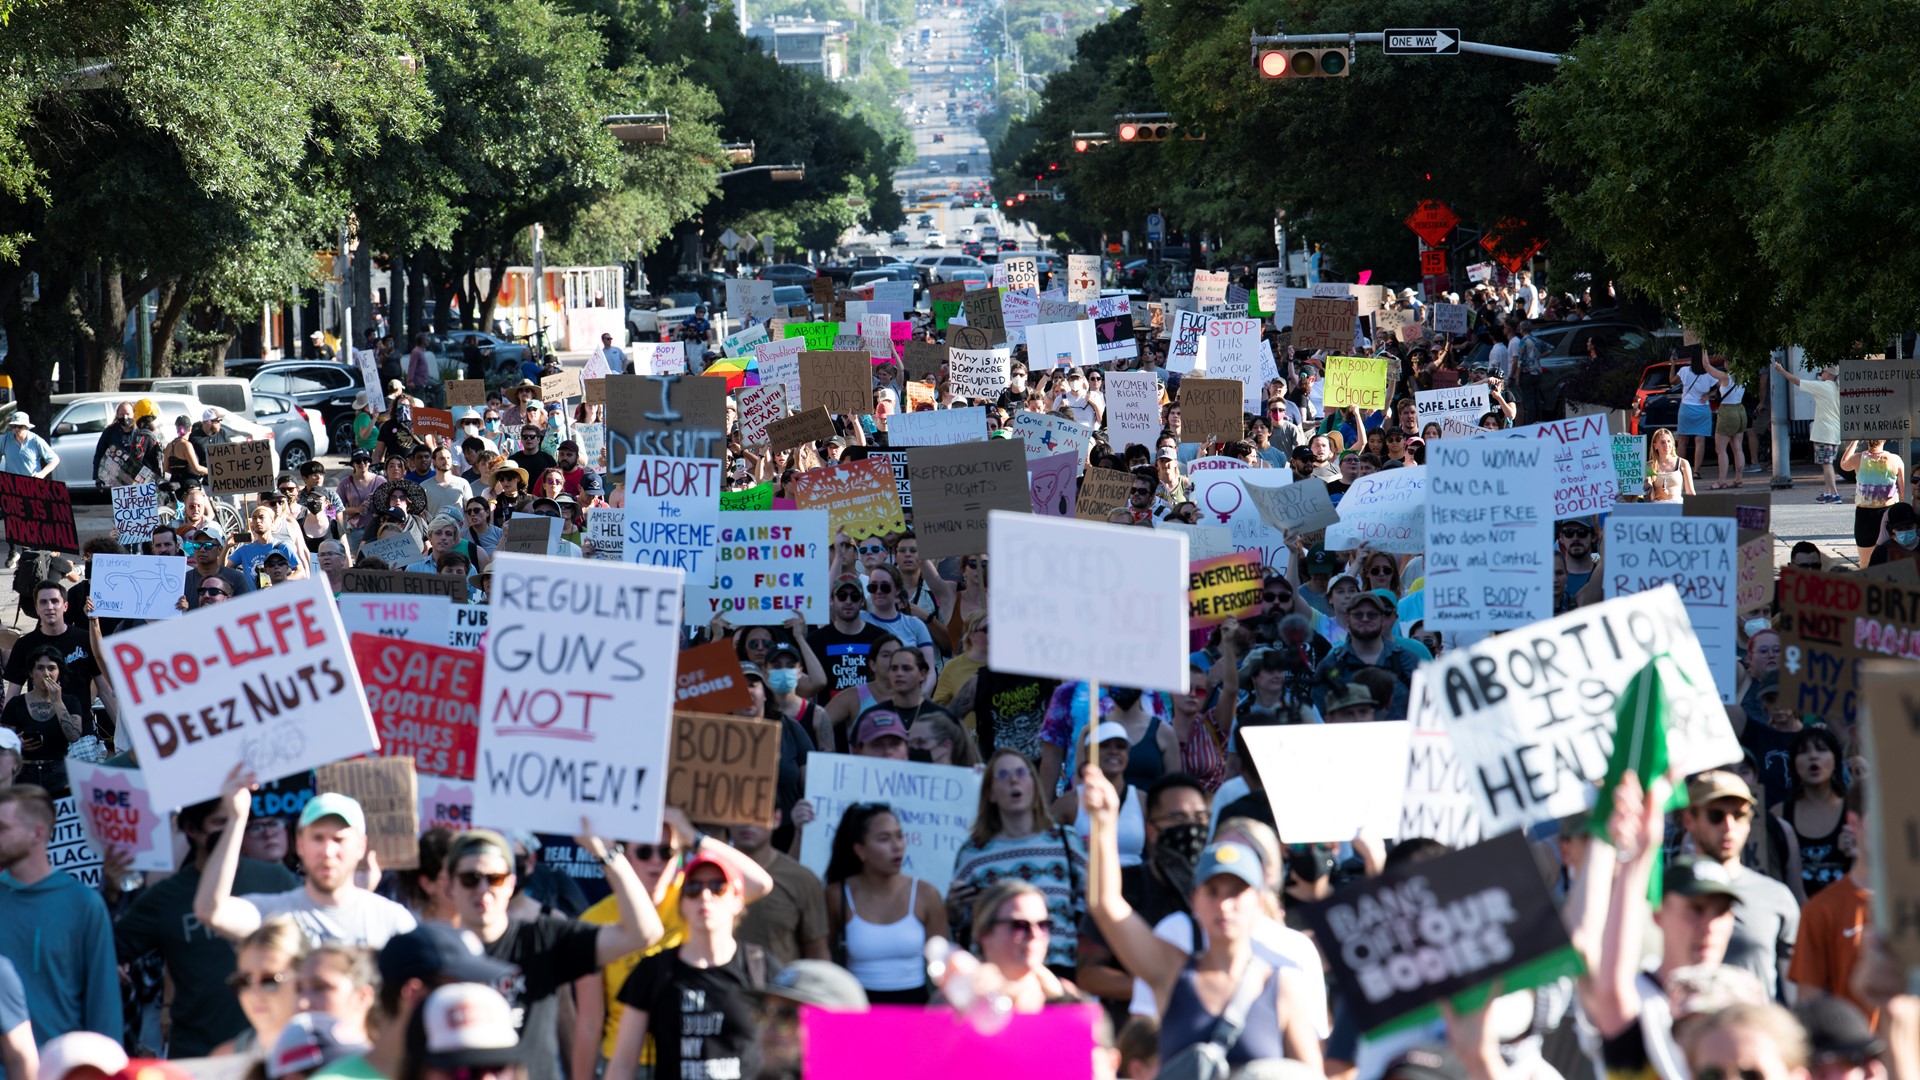 Those upset by the Supreme Court's opinion took to the streets of Austin, marching to the Texas State Capitol.